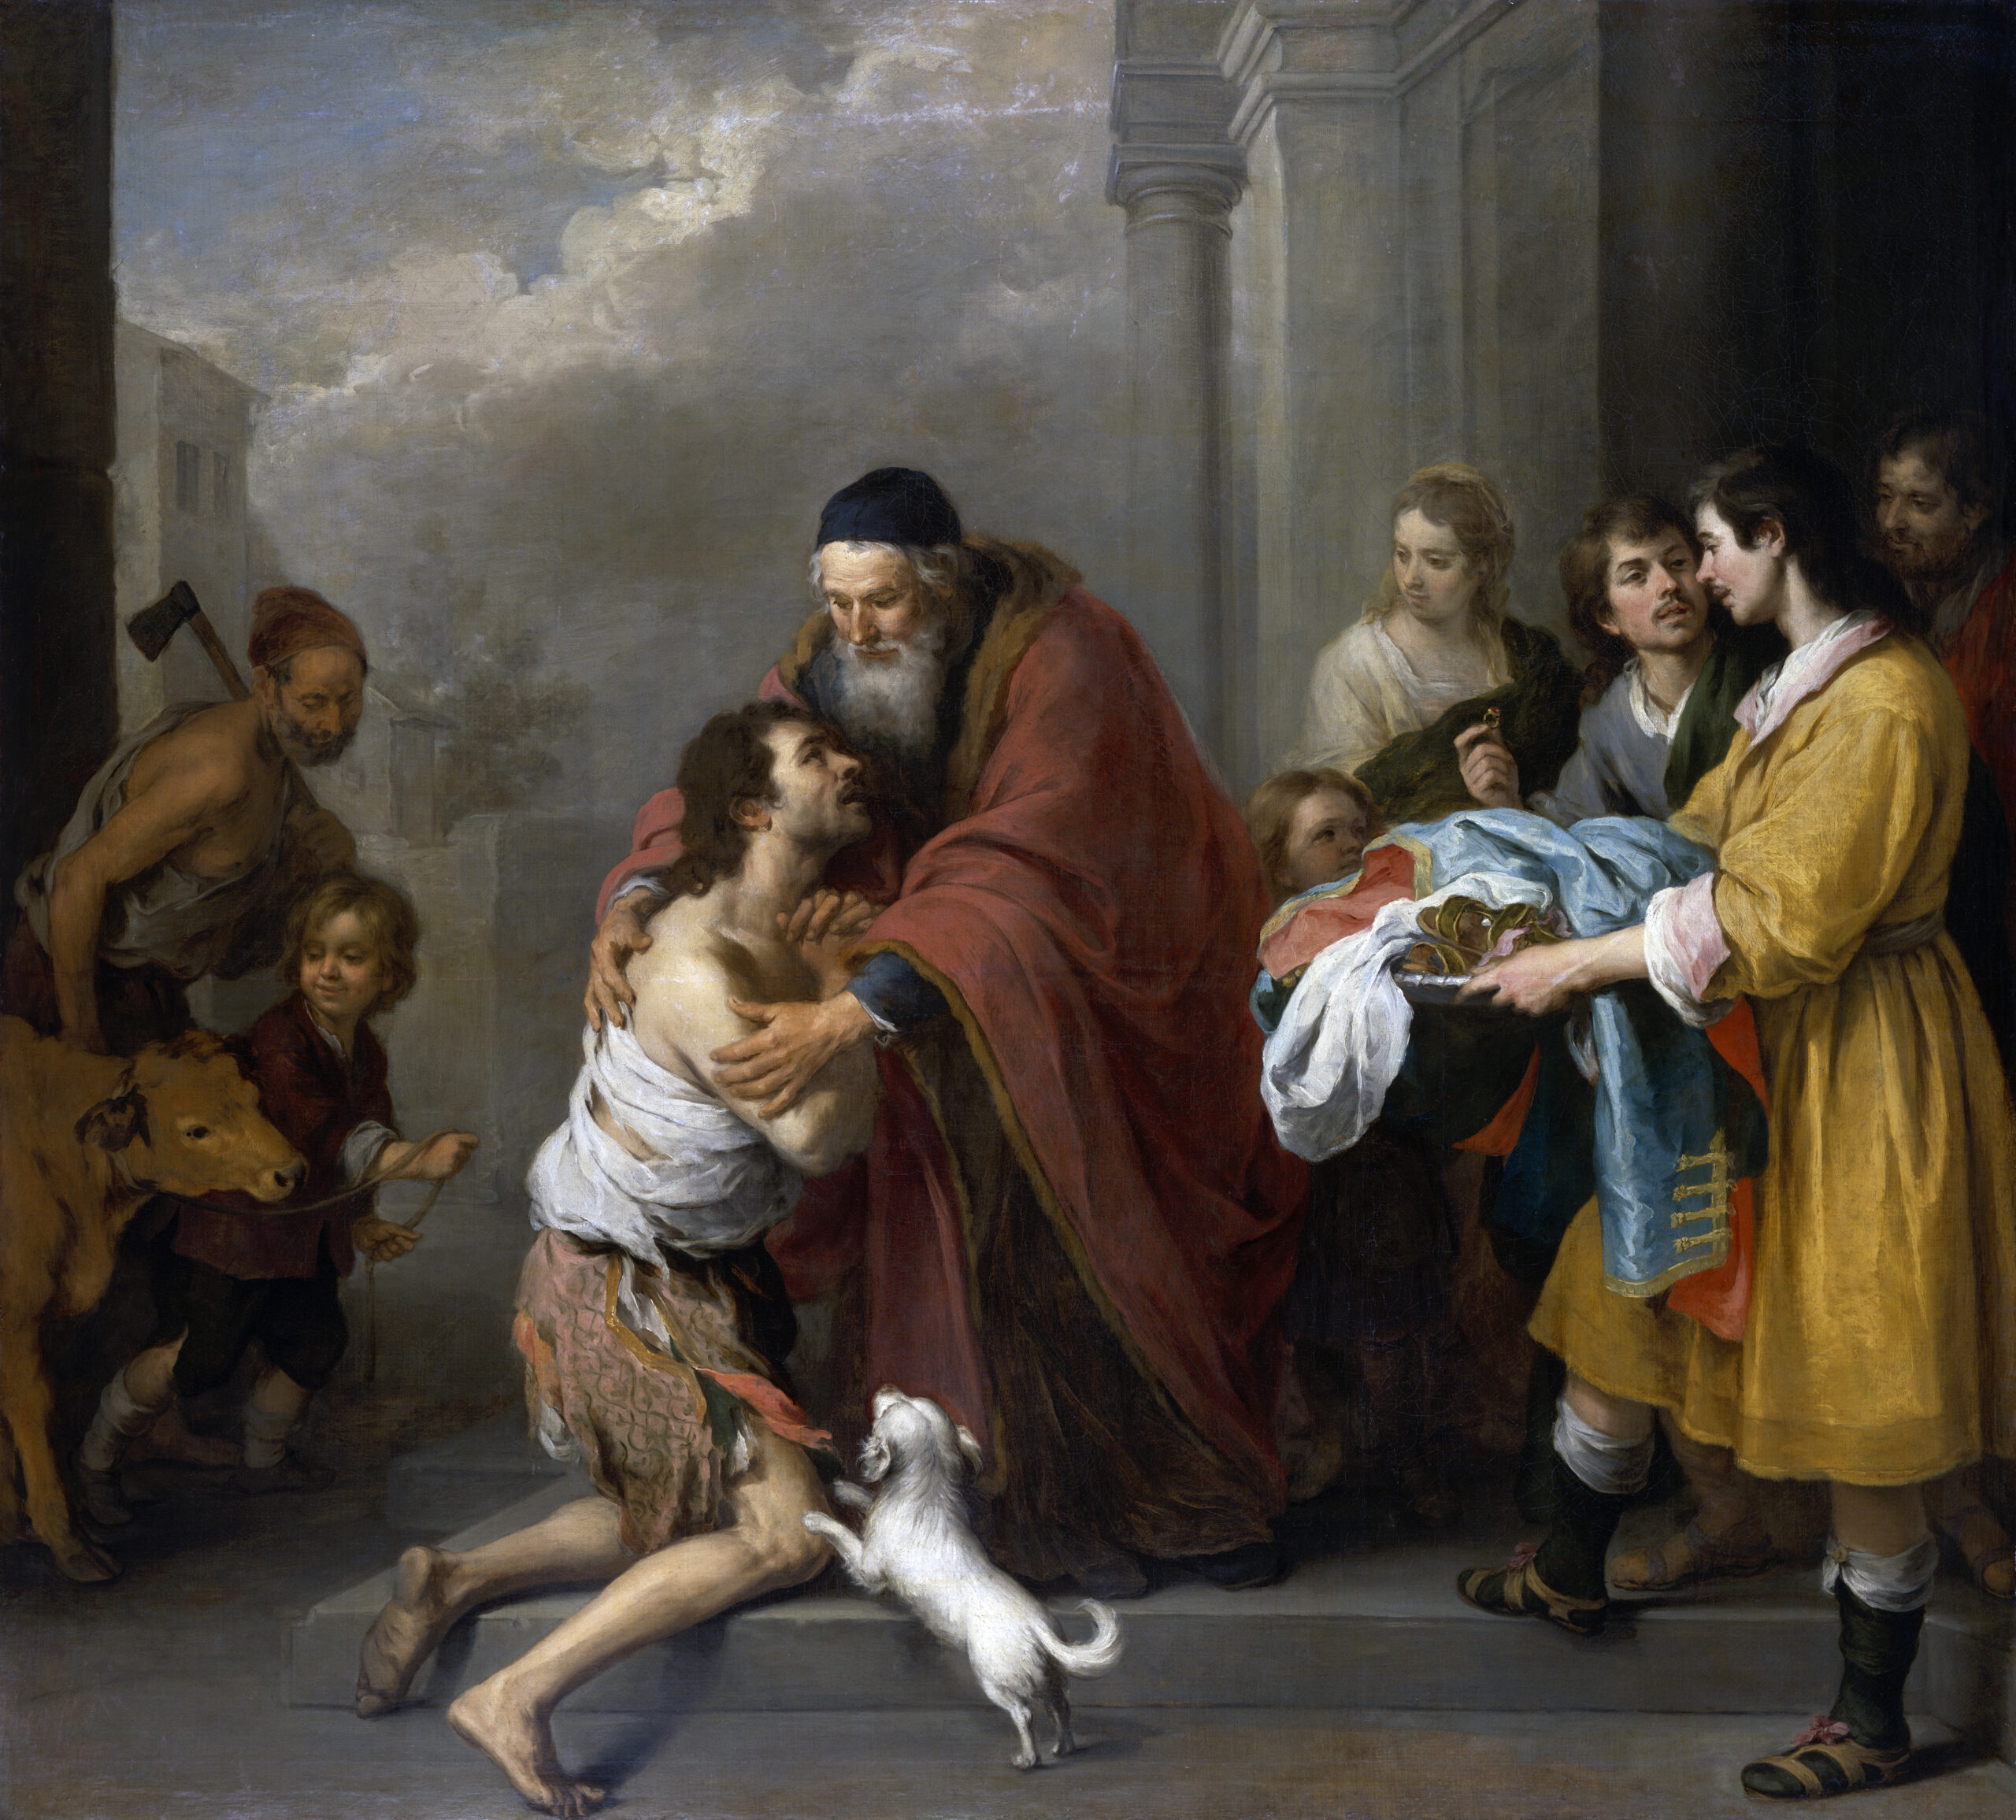 5 Lessons the Prodigal Son Can Teach Us